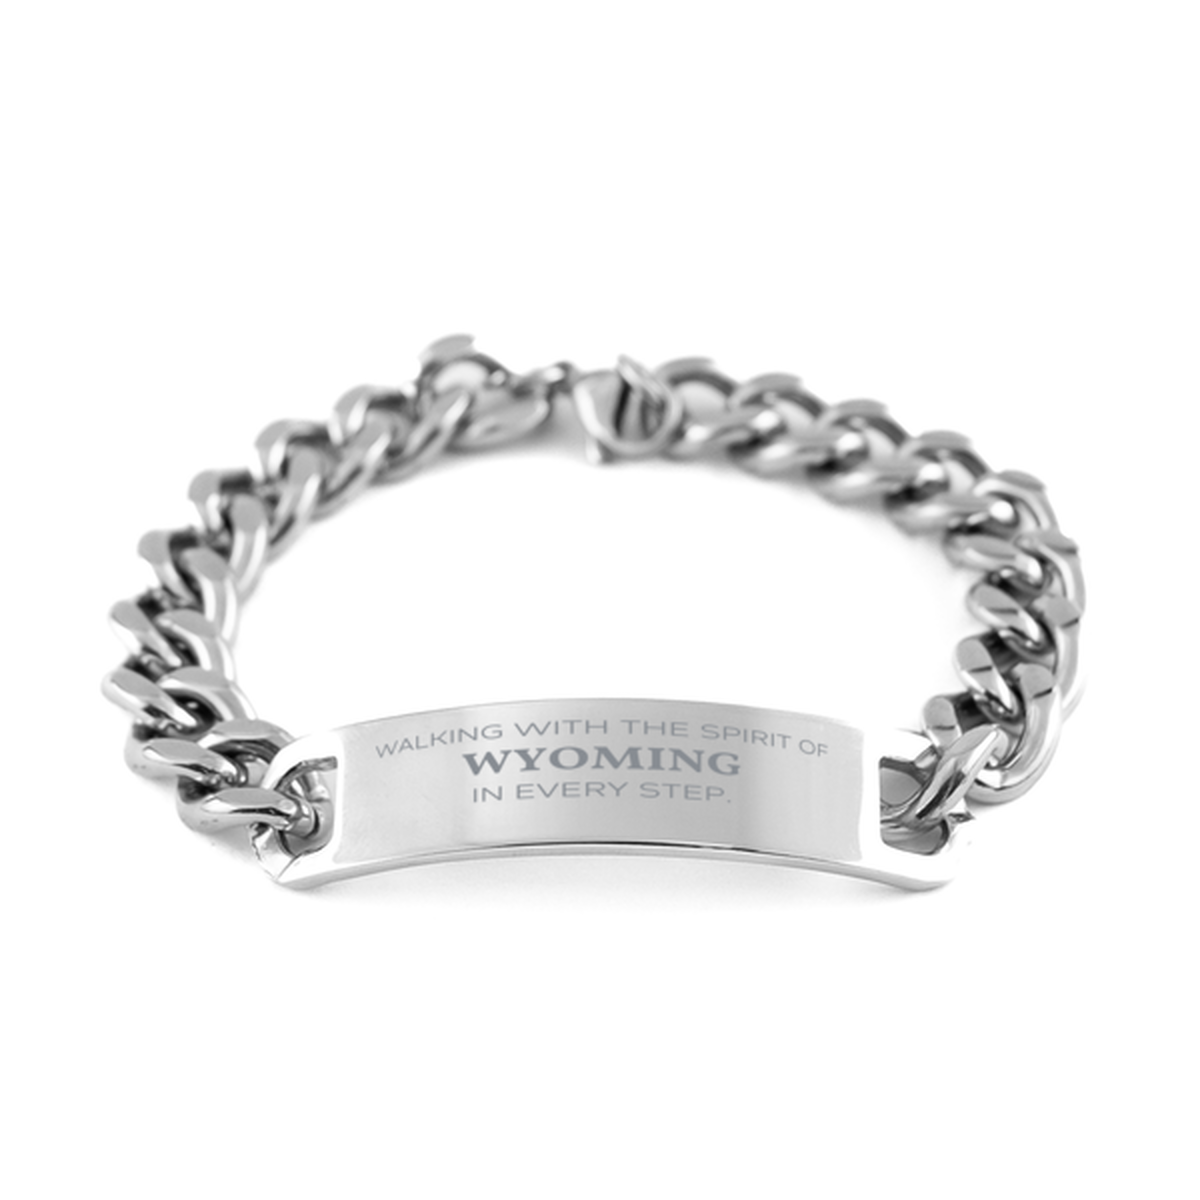 Wyoming Gifts, Walking with the spirit, Love Wyoming Birthday Christmas Cuban Chain Stainless Steel Bracelet For Wyoming People, Men, Women, Friends